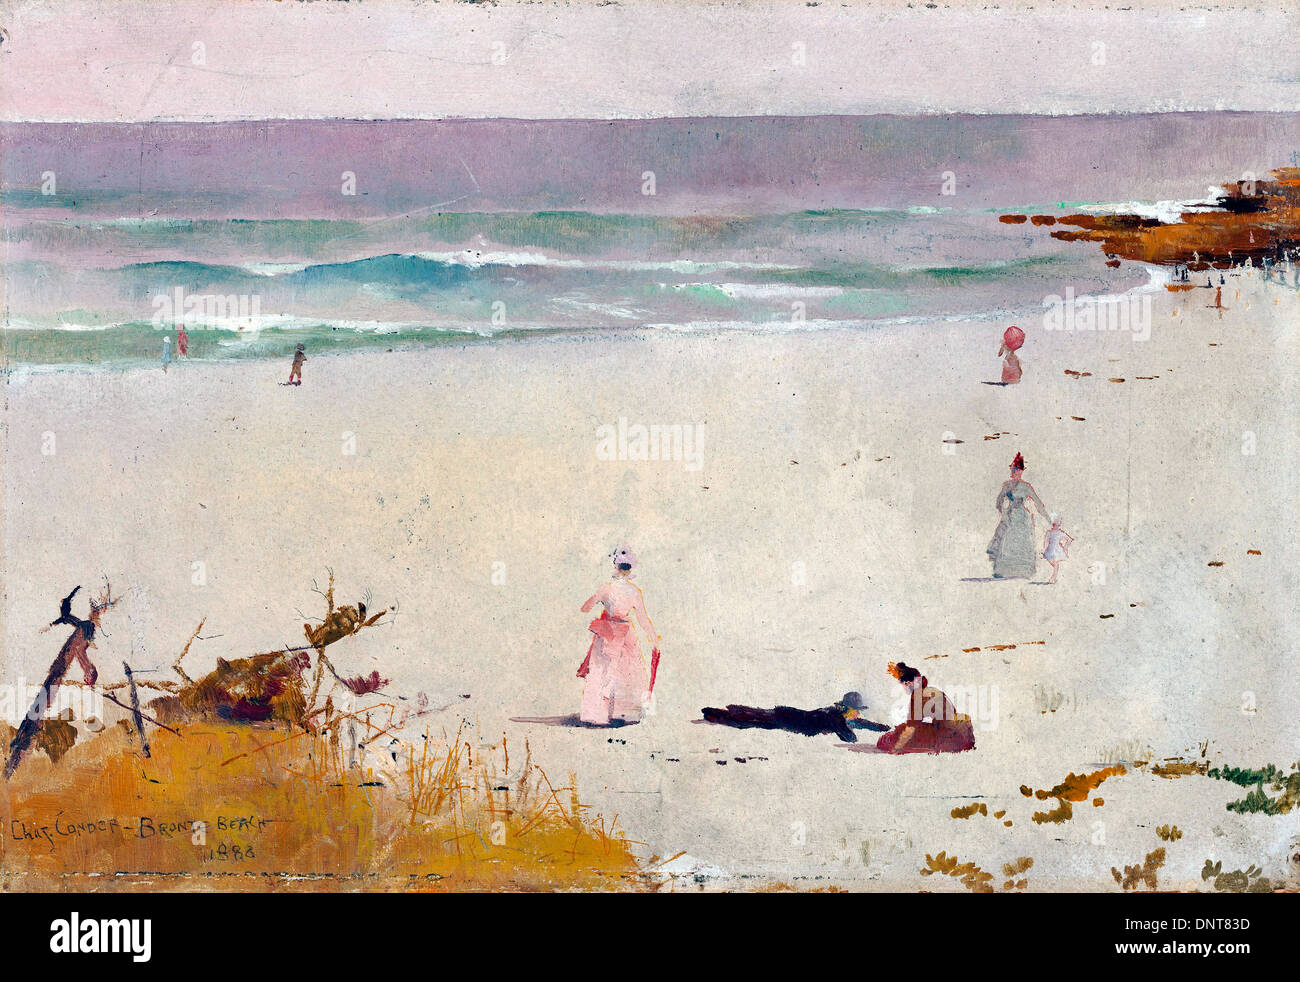 Charles Conder, Bronte Beach 1888 Oil on paper on cardboard. National Gallery of Australia, Canberra, Australia. Stock Photo